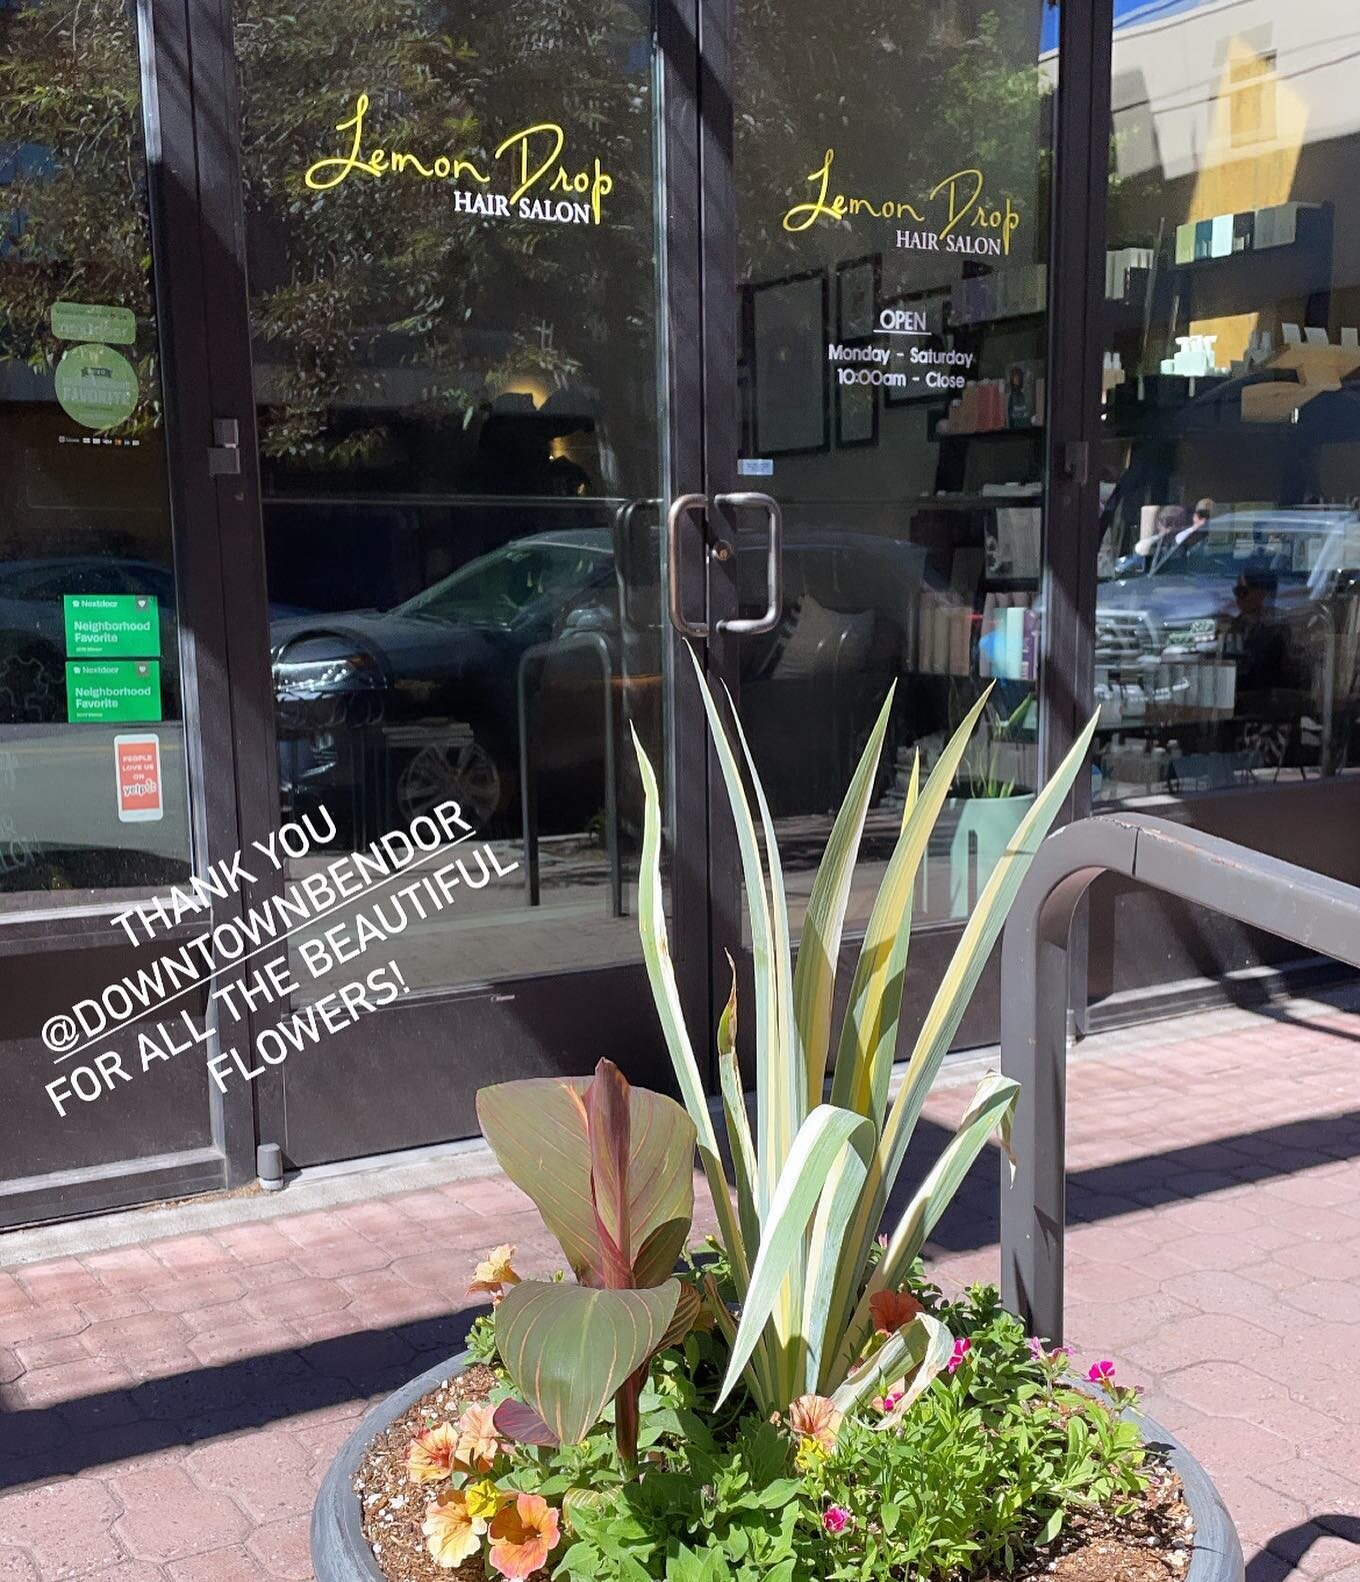 Downtown Bend is so beautiful, the sun is shining and there are fresh flowers everywhere! Thanks to The Downtown Business Association! 

I love seeing all the people outside and the retail shops with the doors open. We live in a pretty awesome town. 